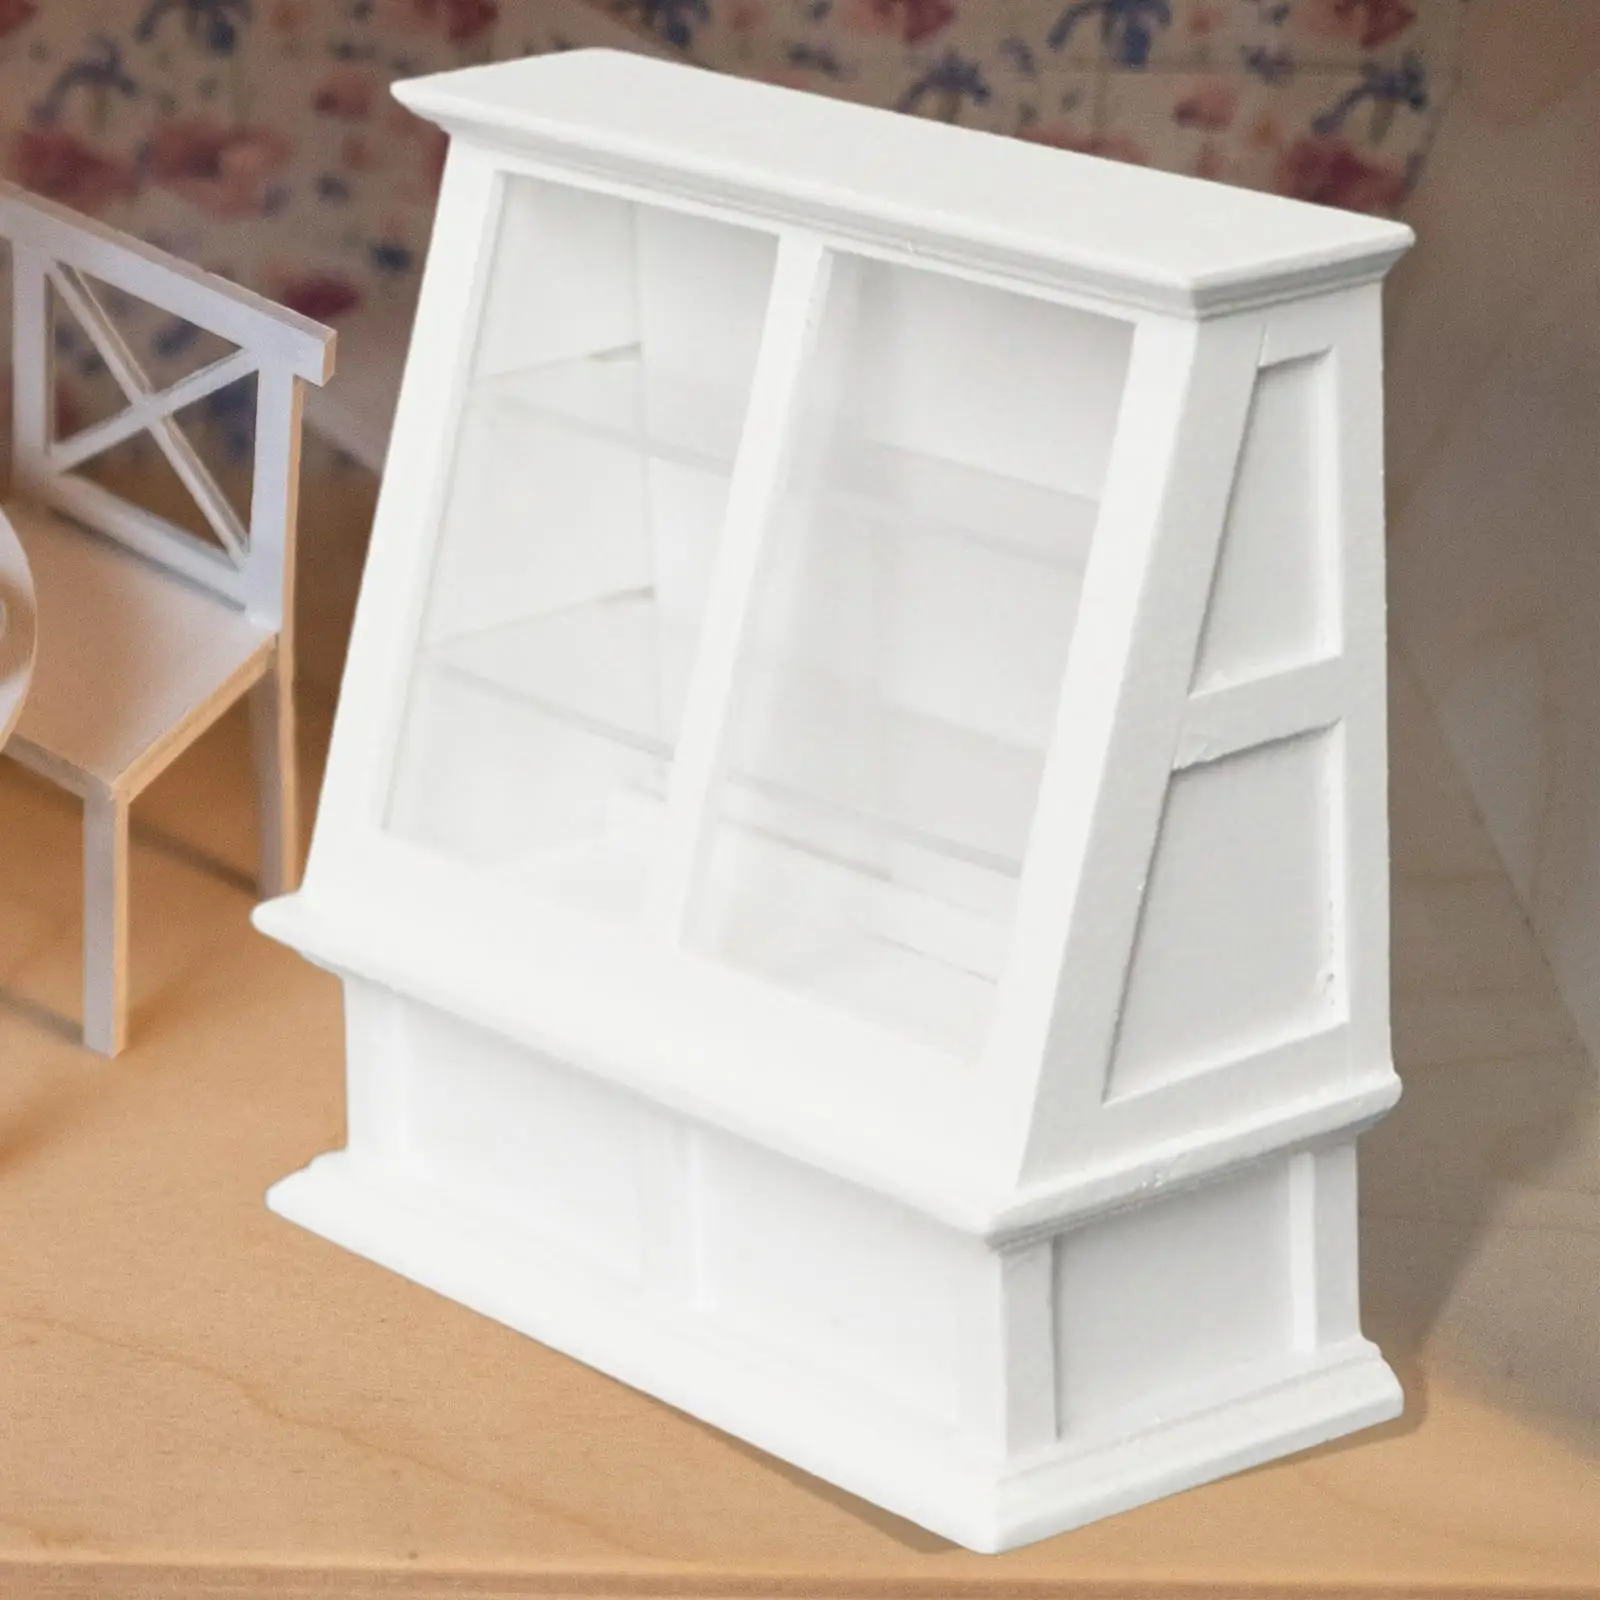 Miniature Cake Cabinet Display Shelves Handcraft for 1:12 Dollhouse Playhouse Furniture Set DIY Projects Ornaments Accessory